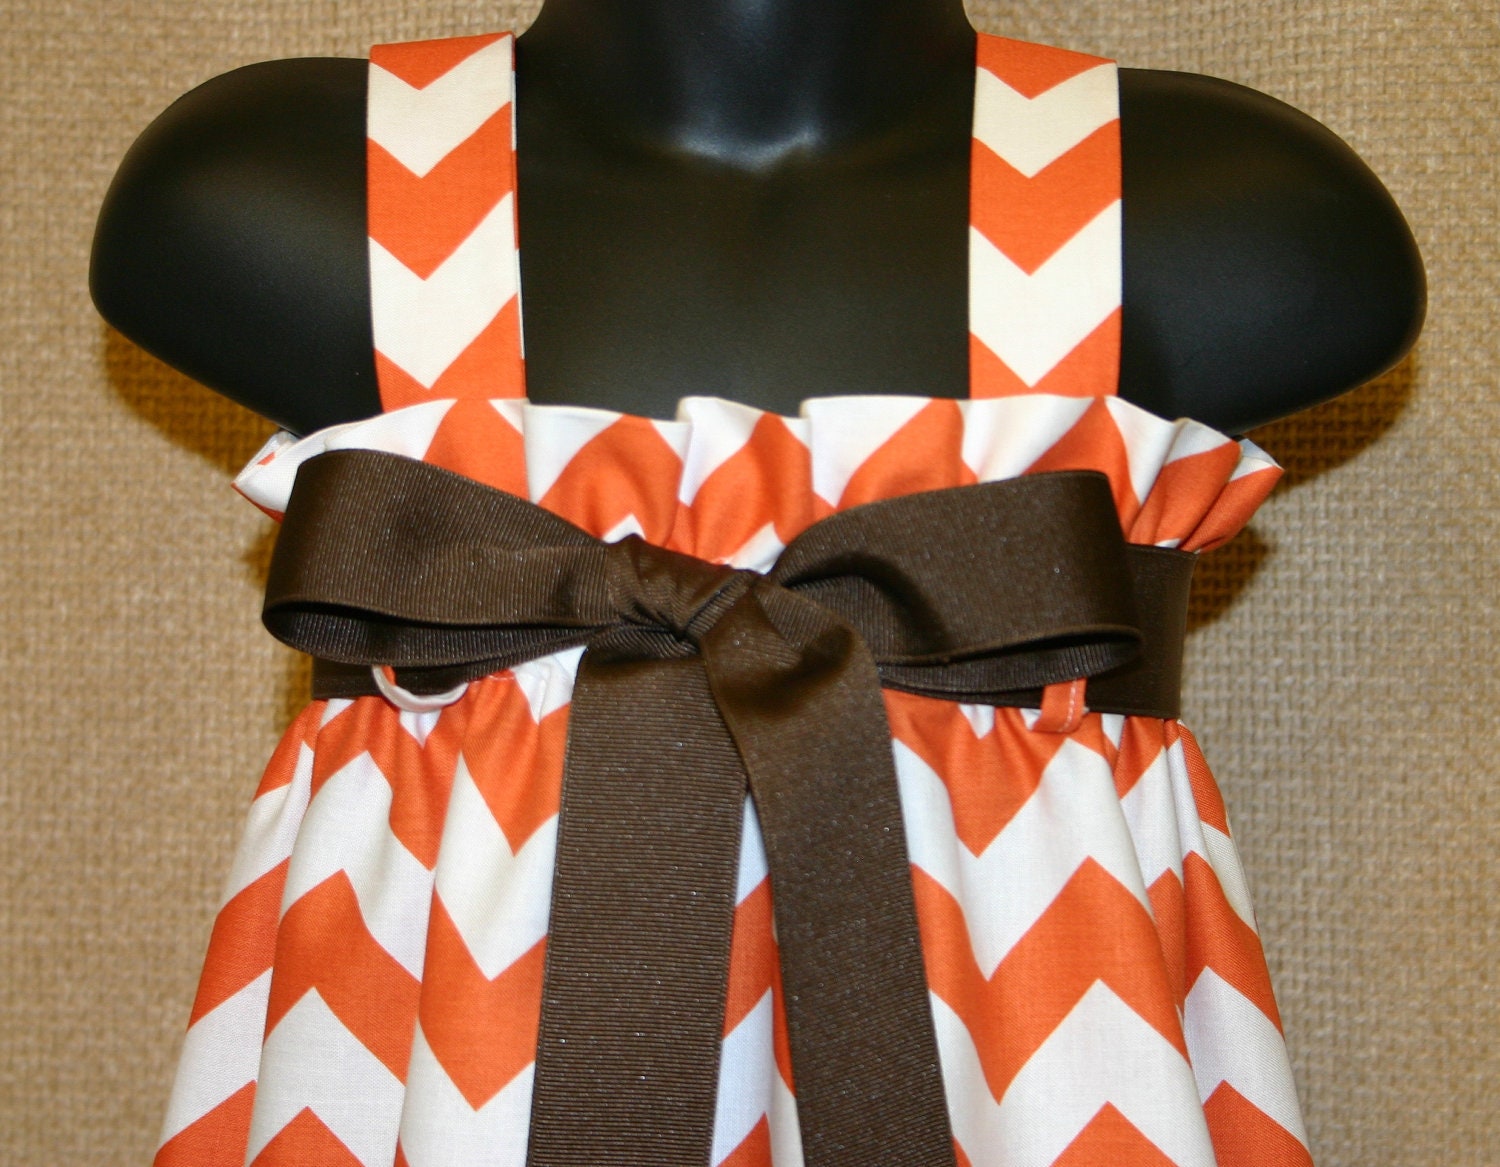 New for Fall - Zadee Dress in Orange or Brown Chevron fabric - Auburn, Florida or Clemson Game Day dress with Ribbon Belt Option